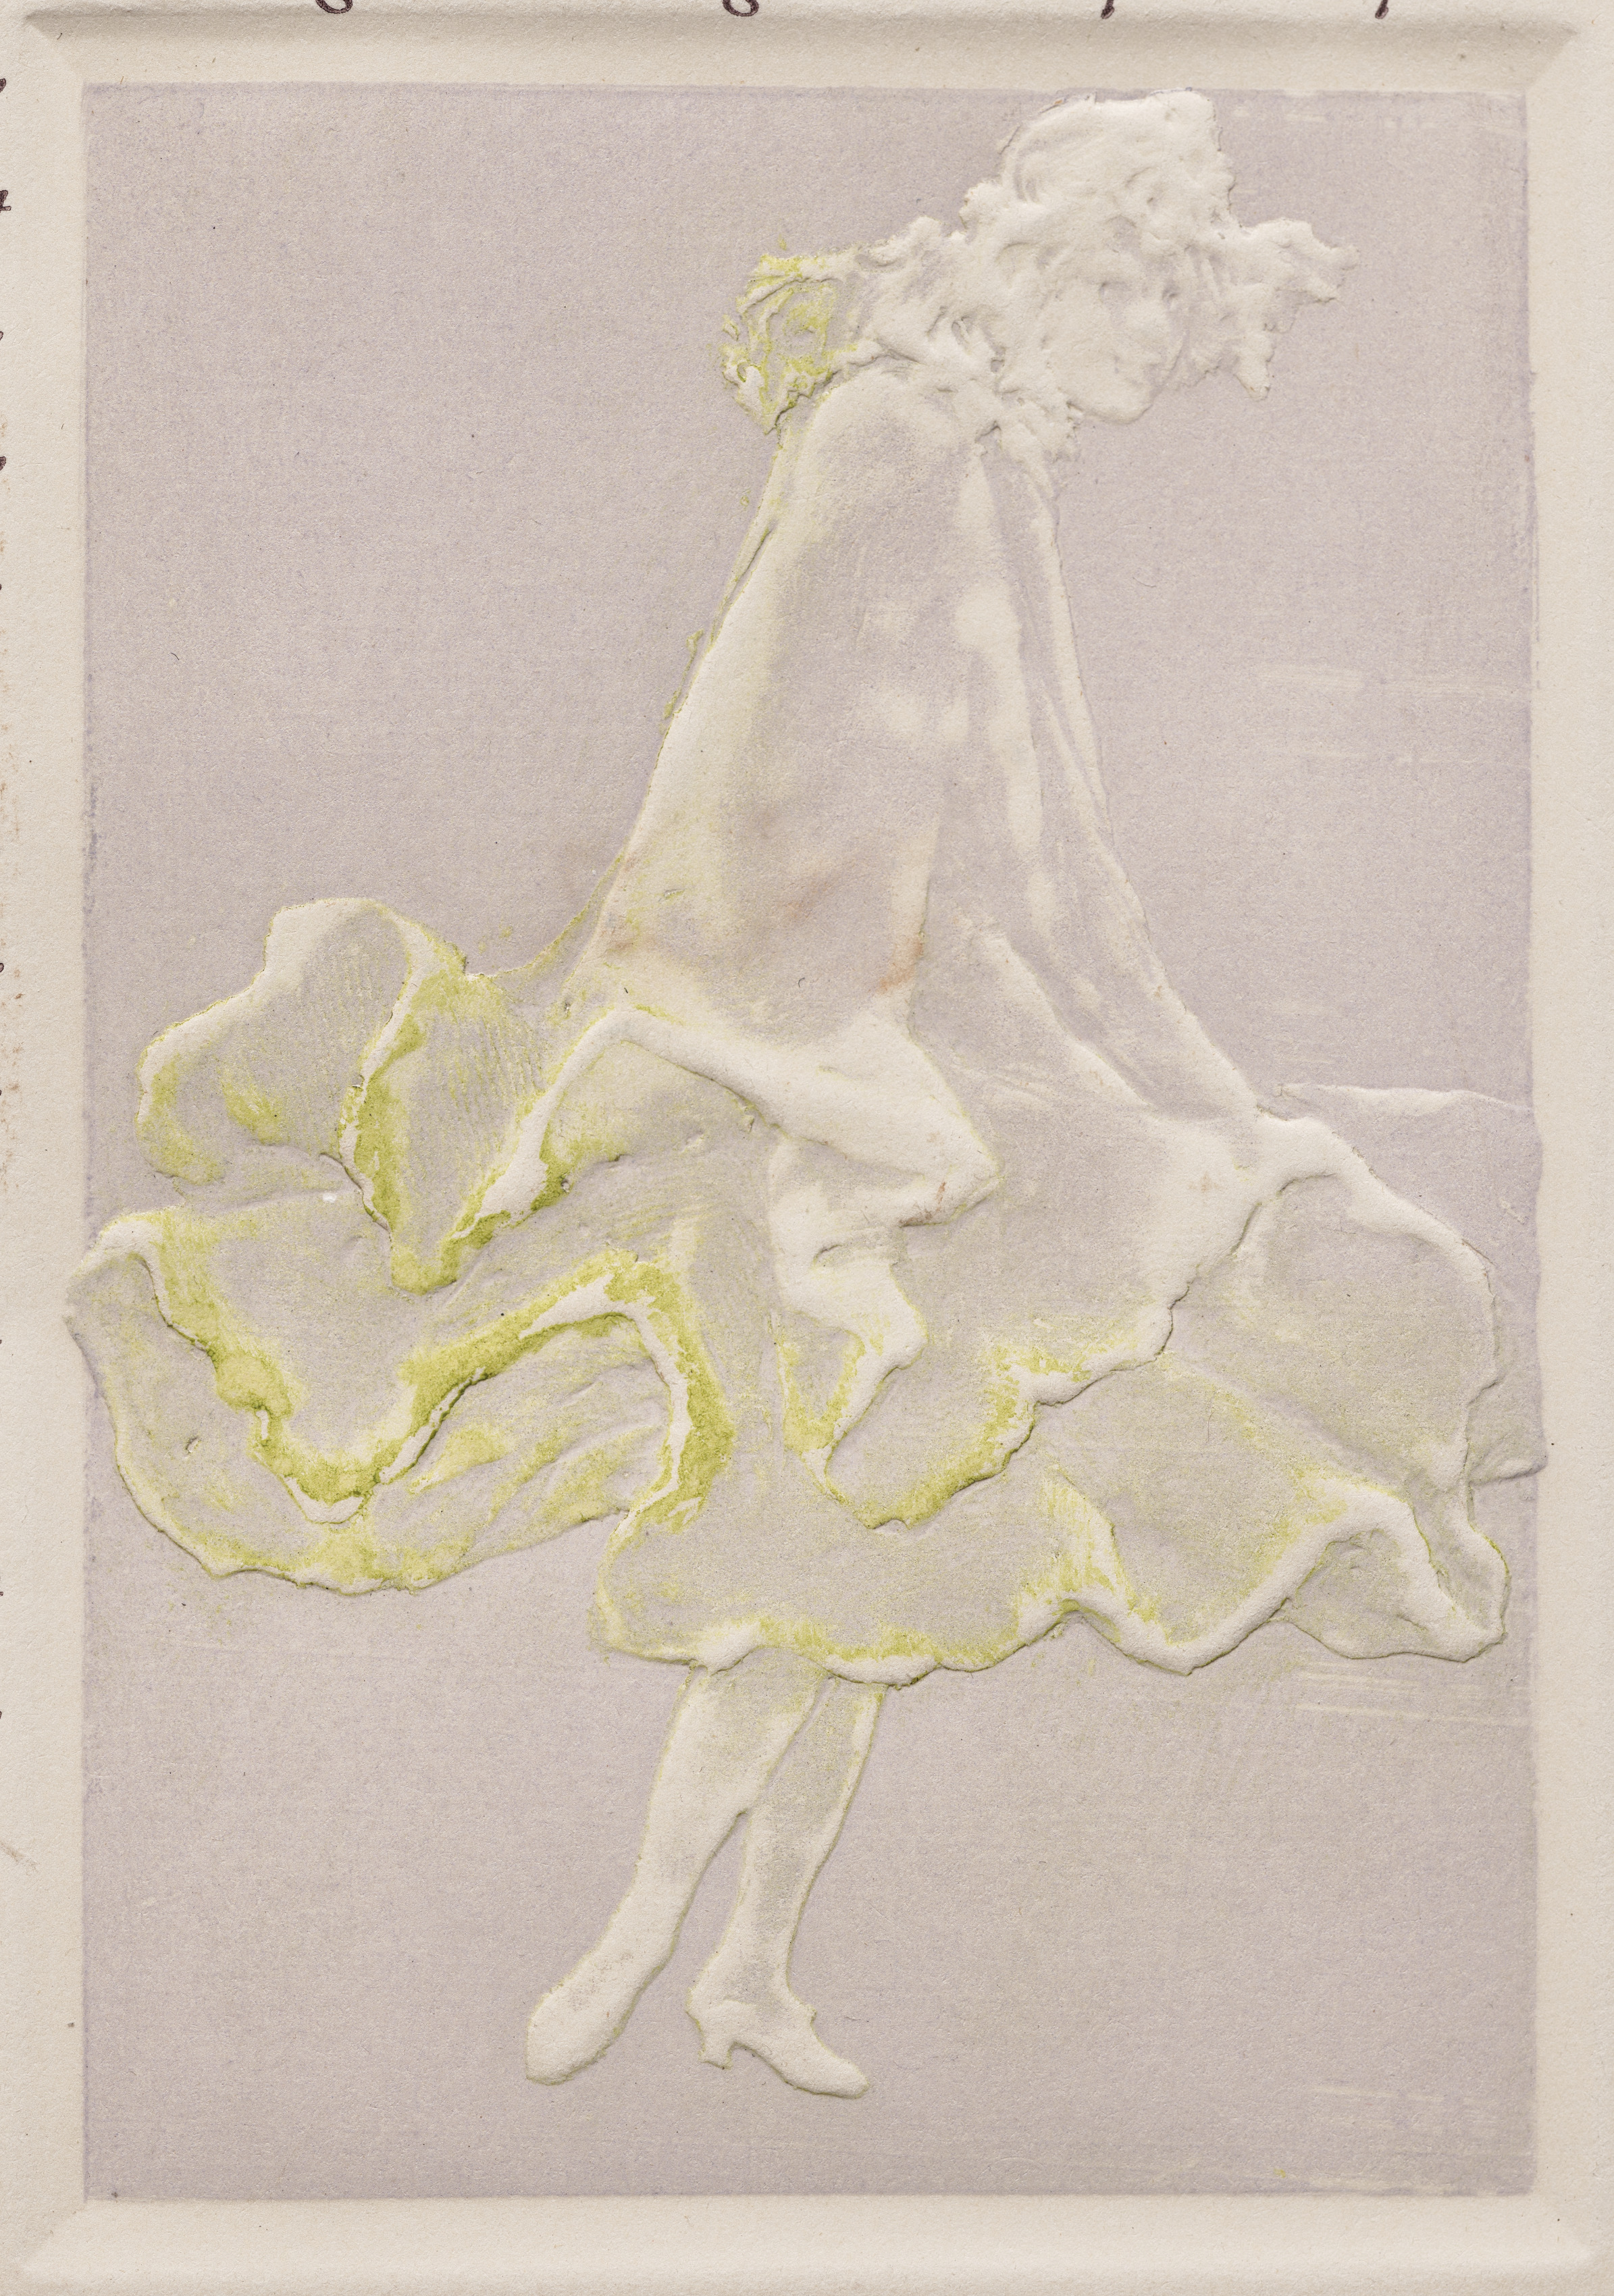 Dancing Woman with Arms Lowered